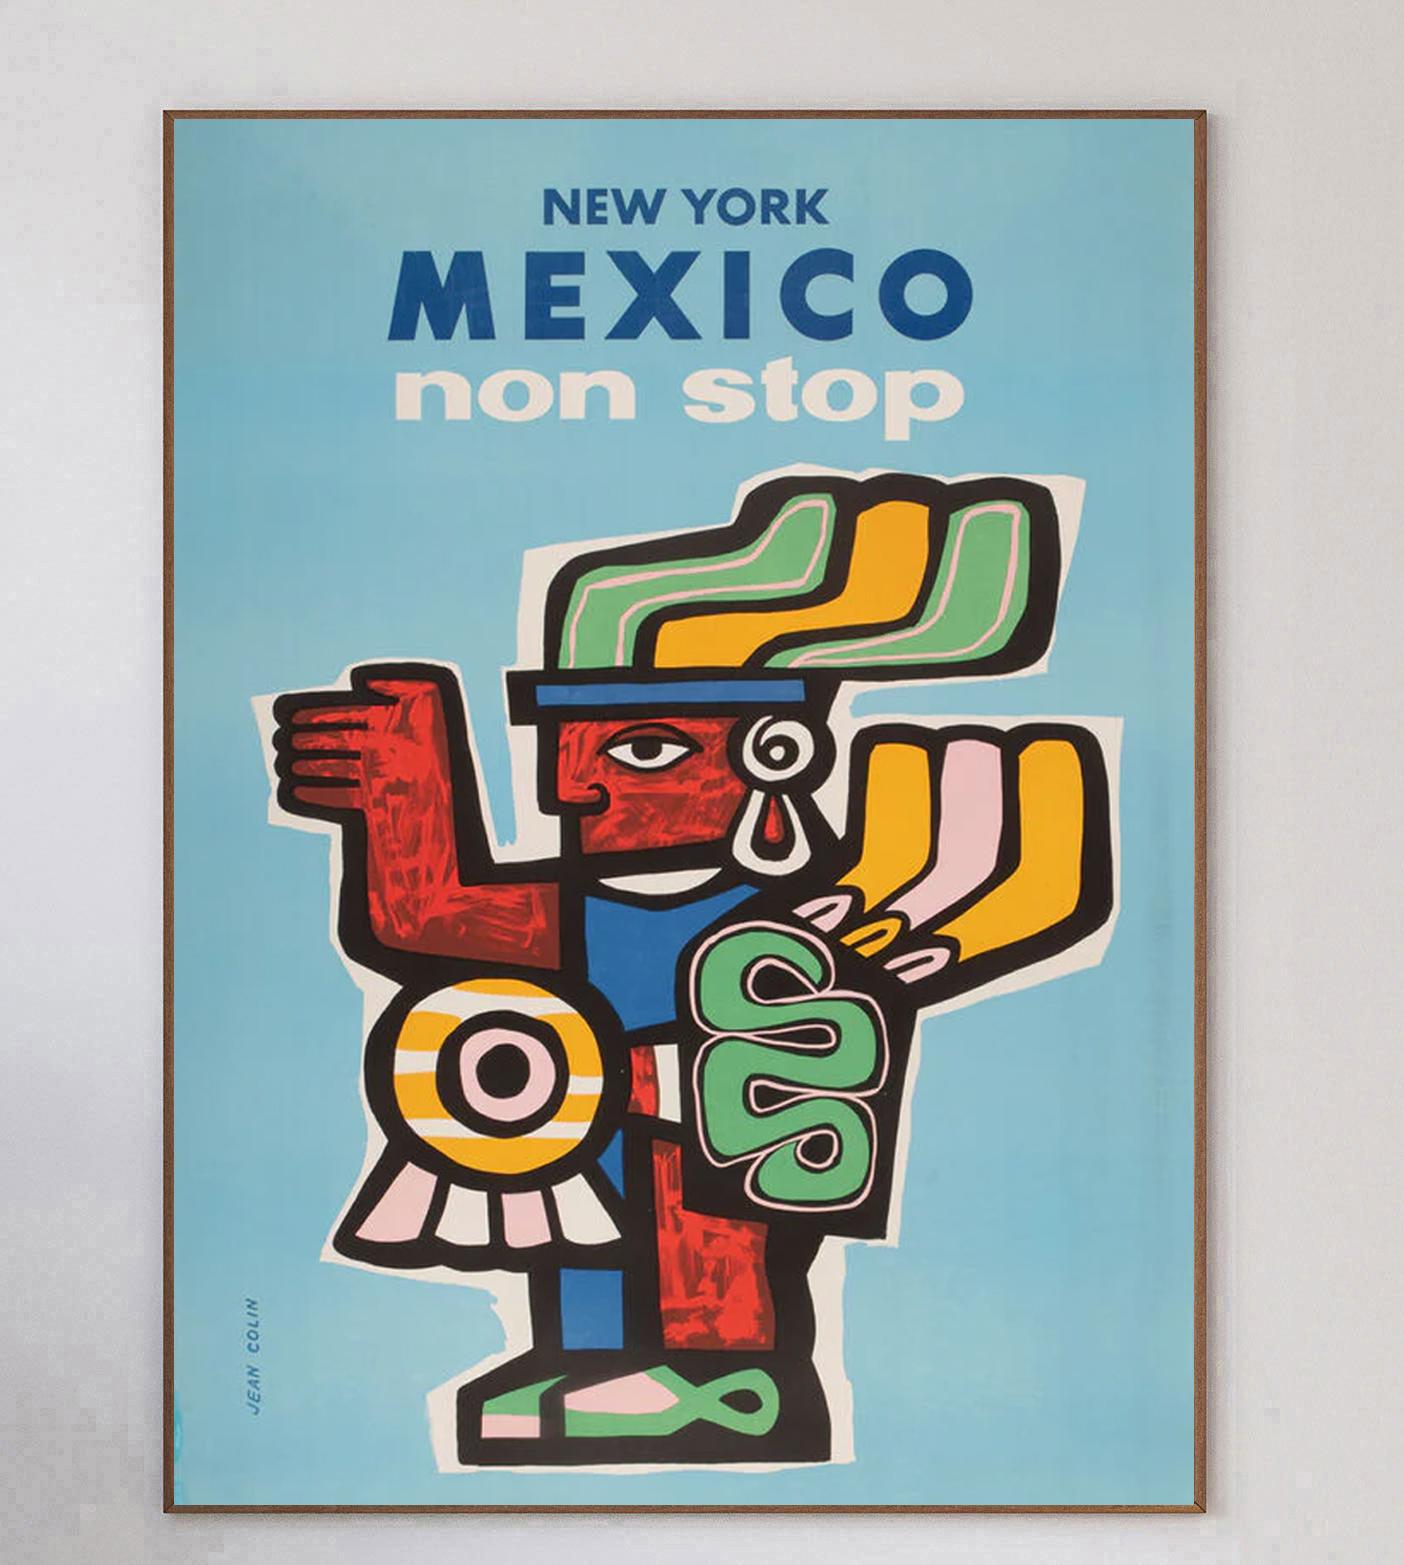 This stunning poster featuring artwork from the great French artist Jean Colin was created in 1960 to promote non stop air travel routes from New York to Mexico. Depicting a Mayan figure in typical Colin style, this piece has vibrant colour and is